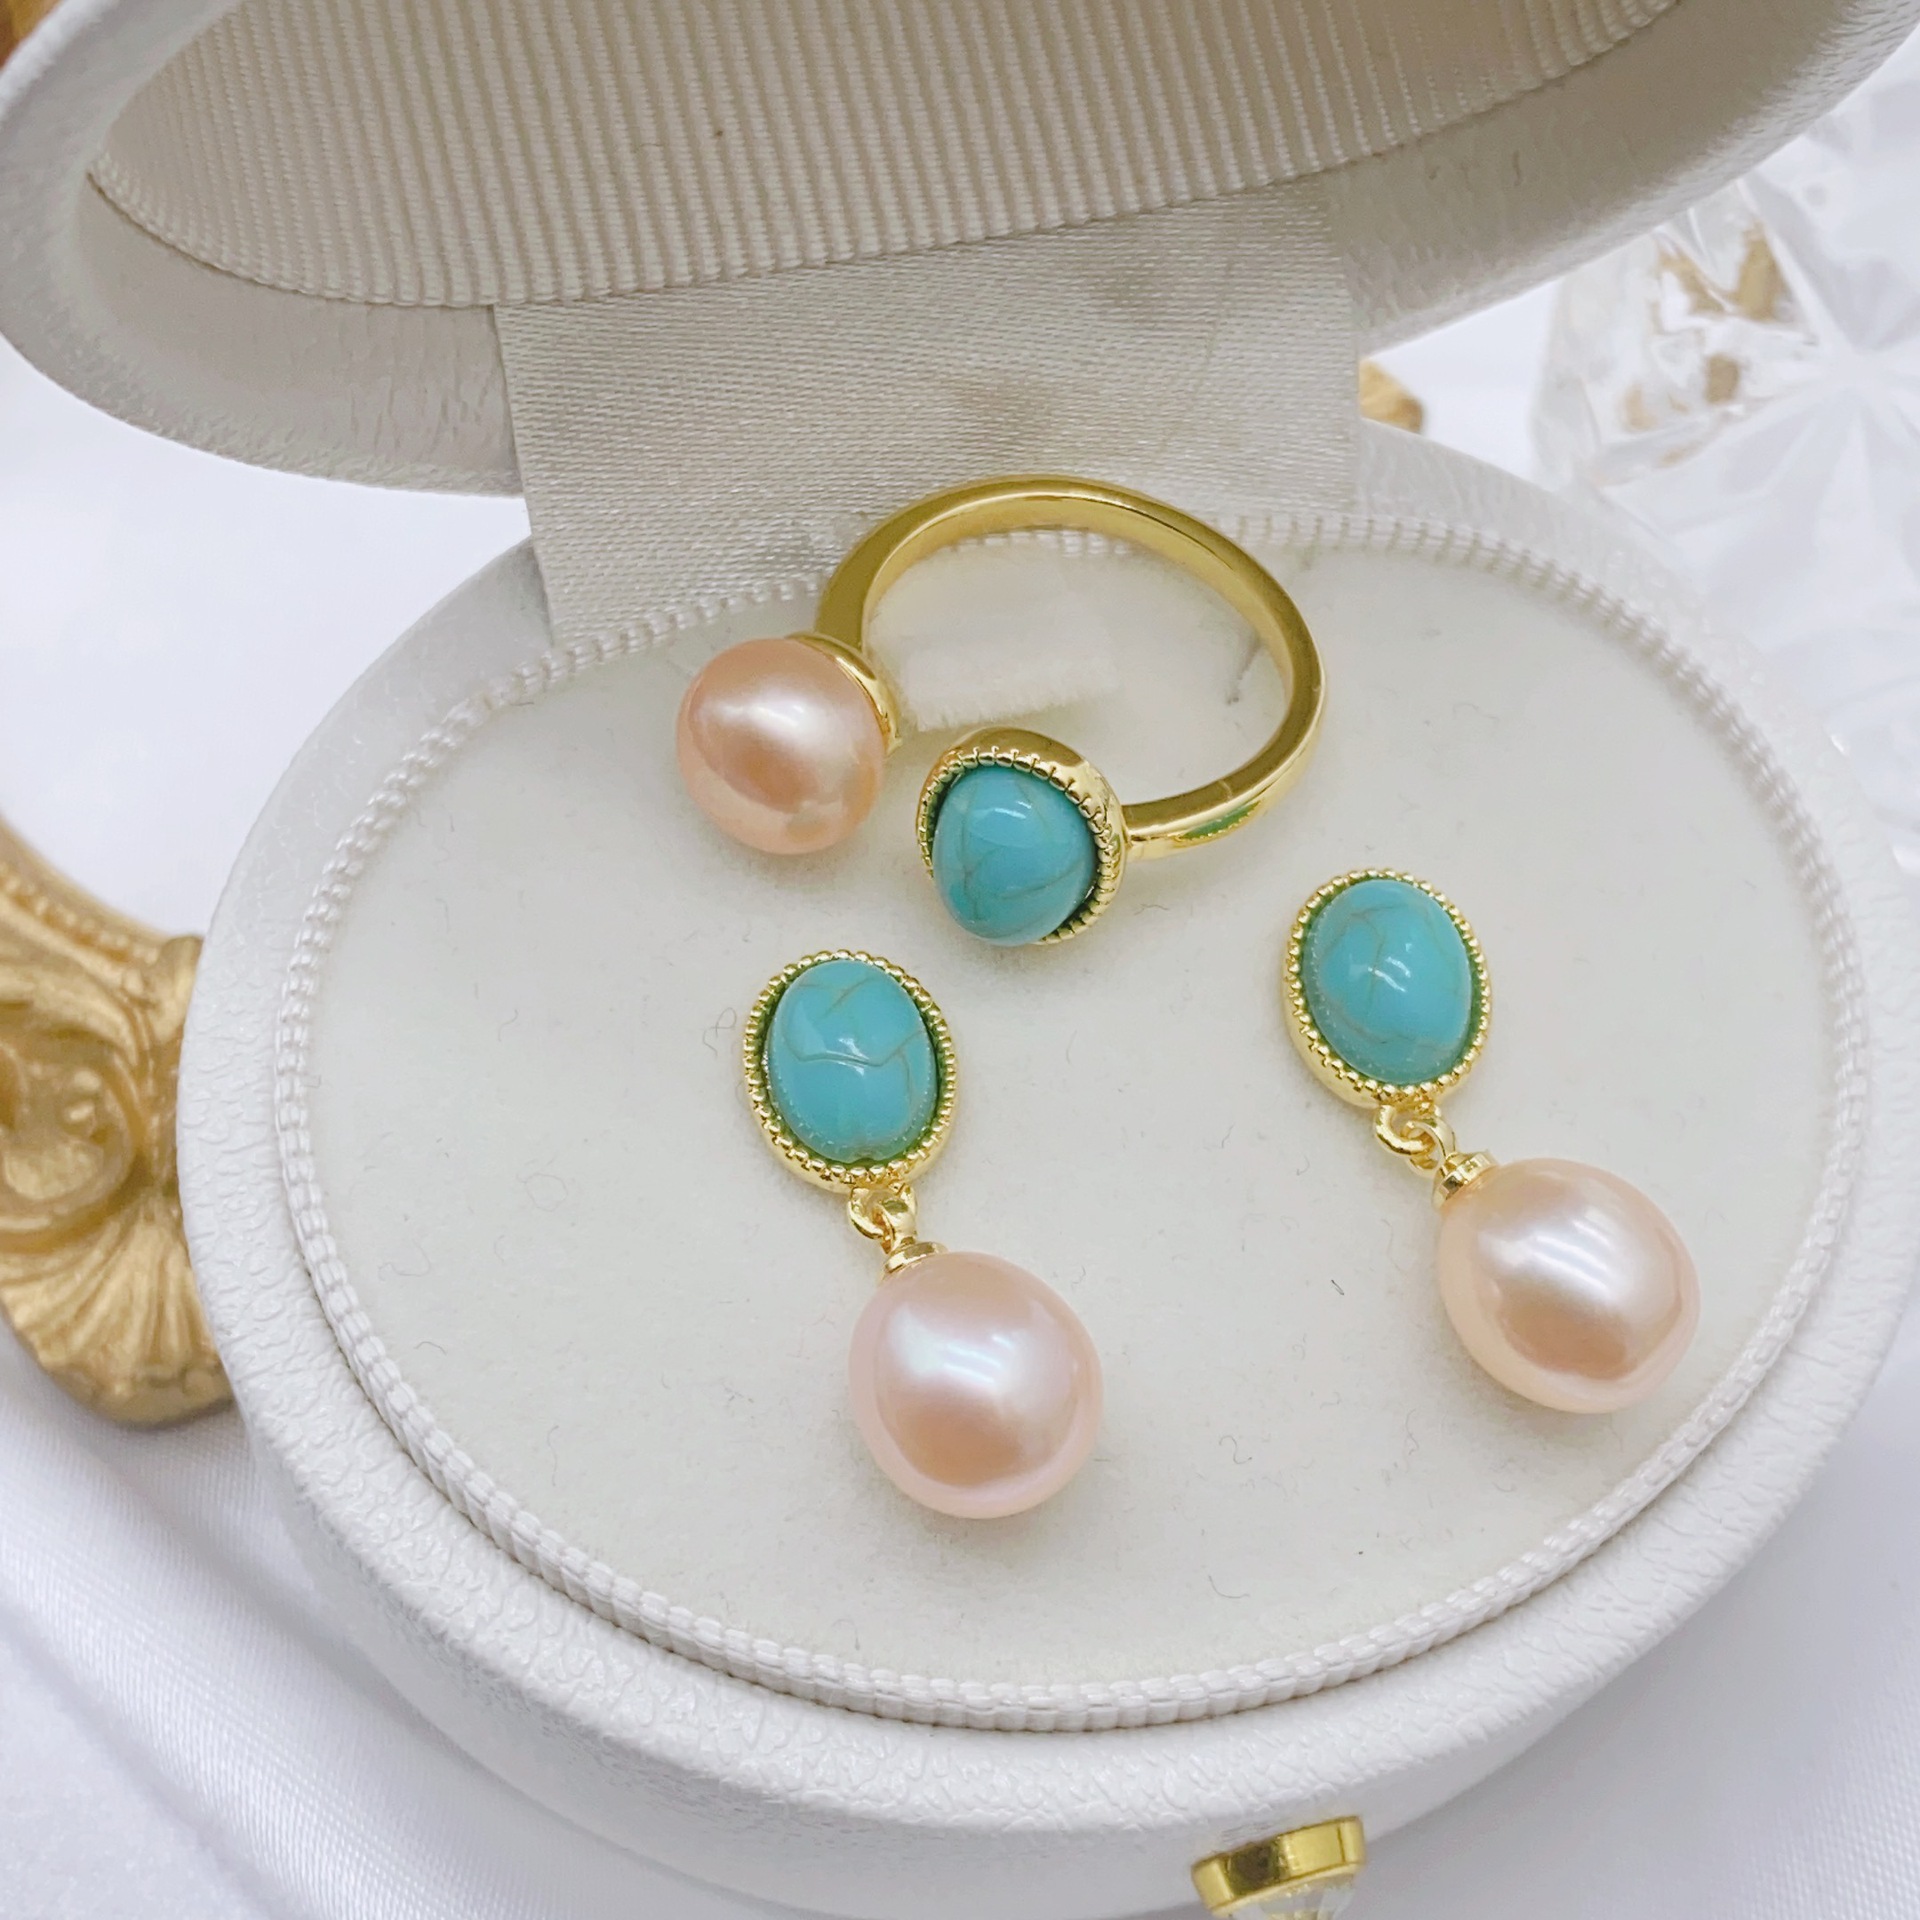 Hepburn Style European and American Cross-Border Products Turquoise Earrings Necklace Pendant Set Natural Freshwater Pearl Earrings Jewelry